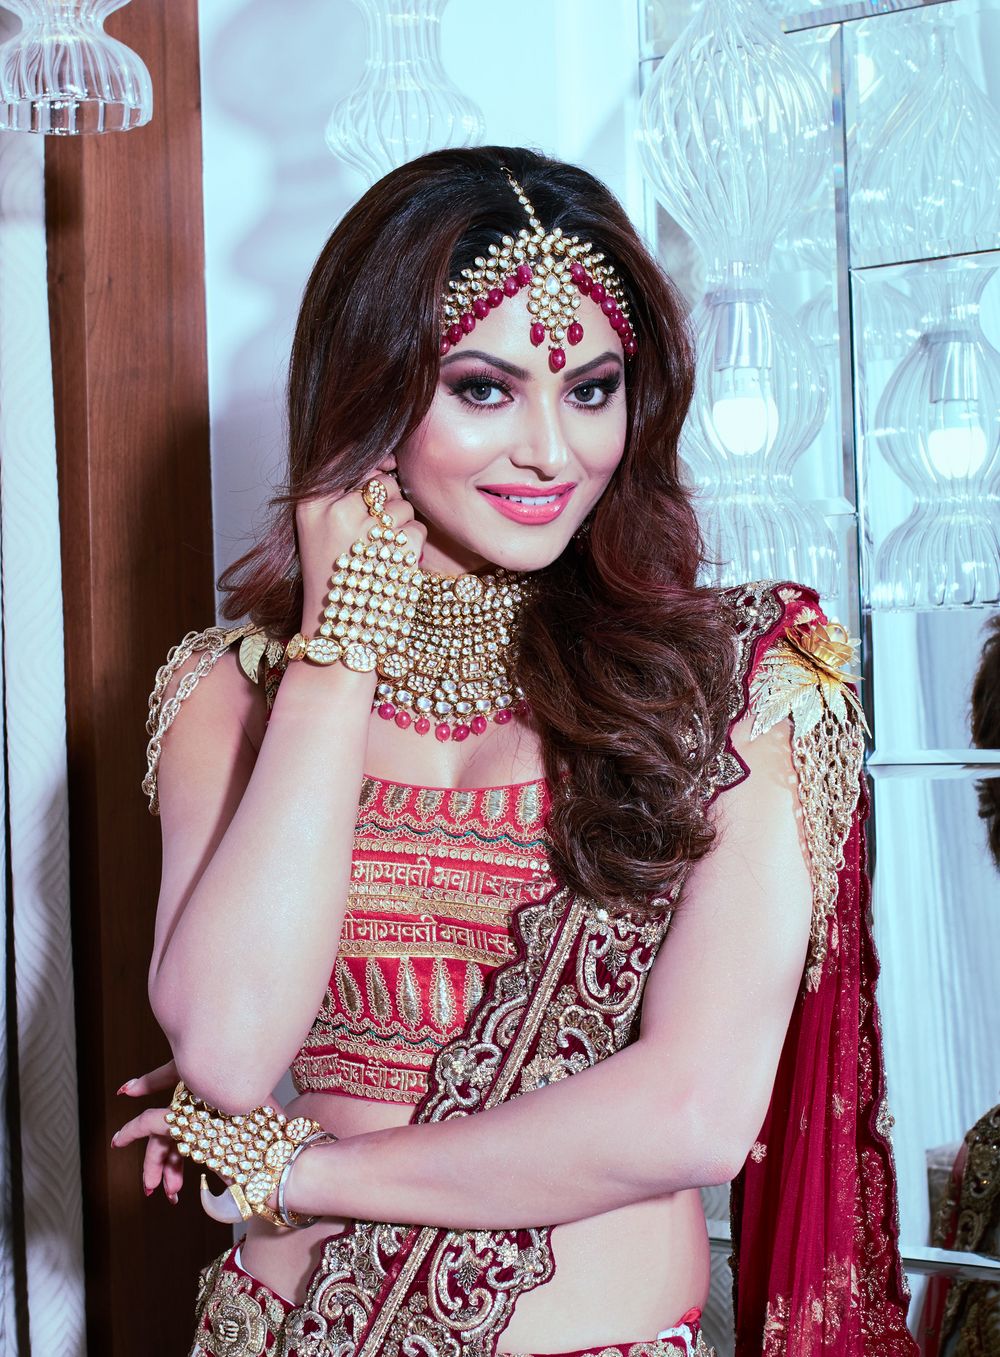 Photo By Makeup by Dimplle S Bathija - Bridal Makeup